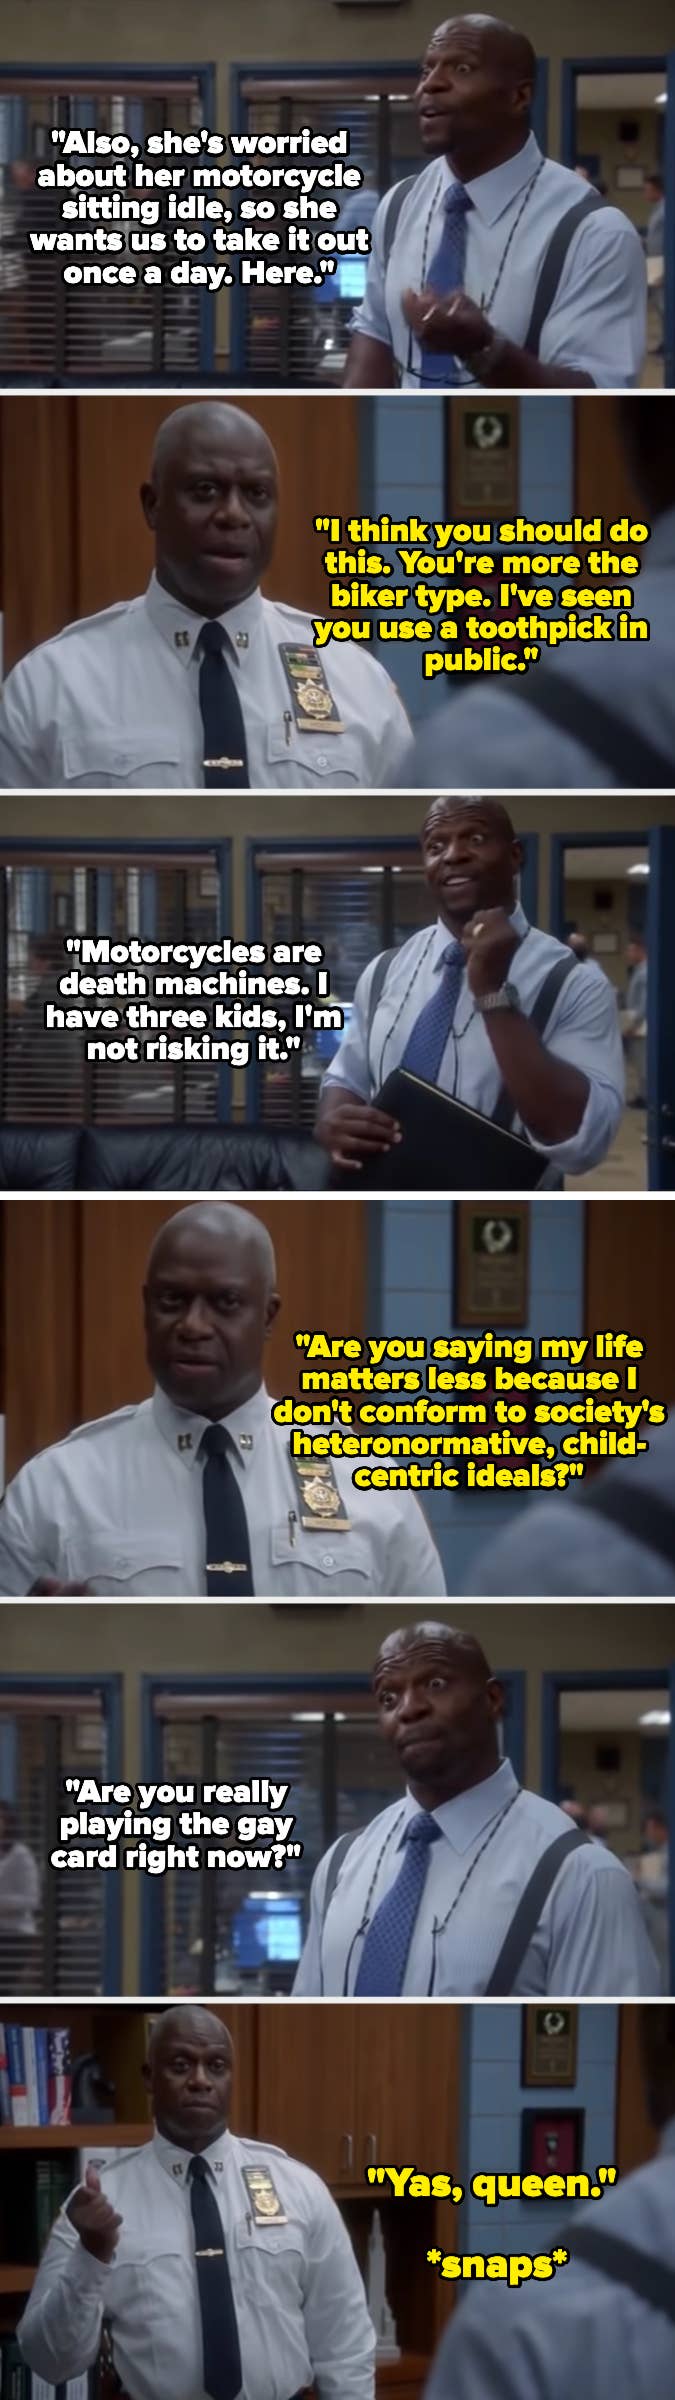 Holt plays the gay card to get out of riding Diaz&#x27;s motorcycle while she&#x27;s in prison